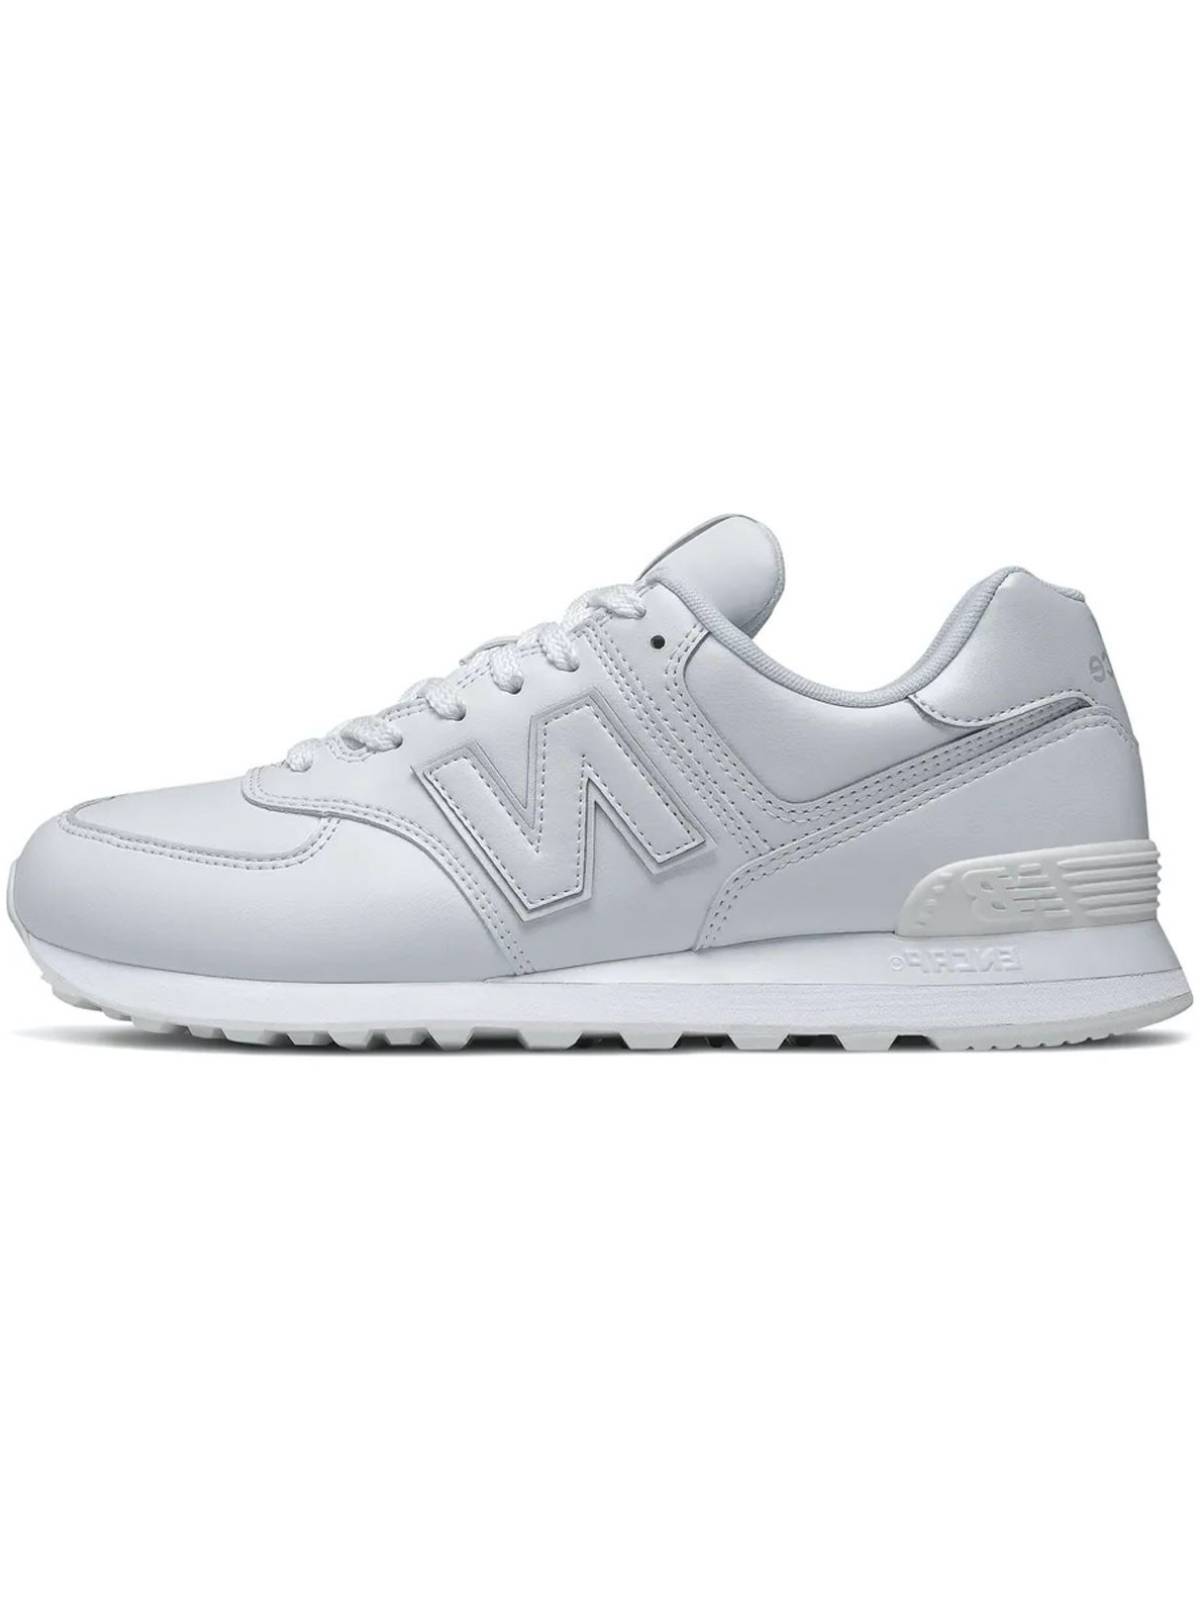   New Balance | 574 Total White Sneakers |  